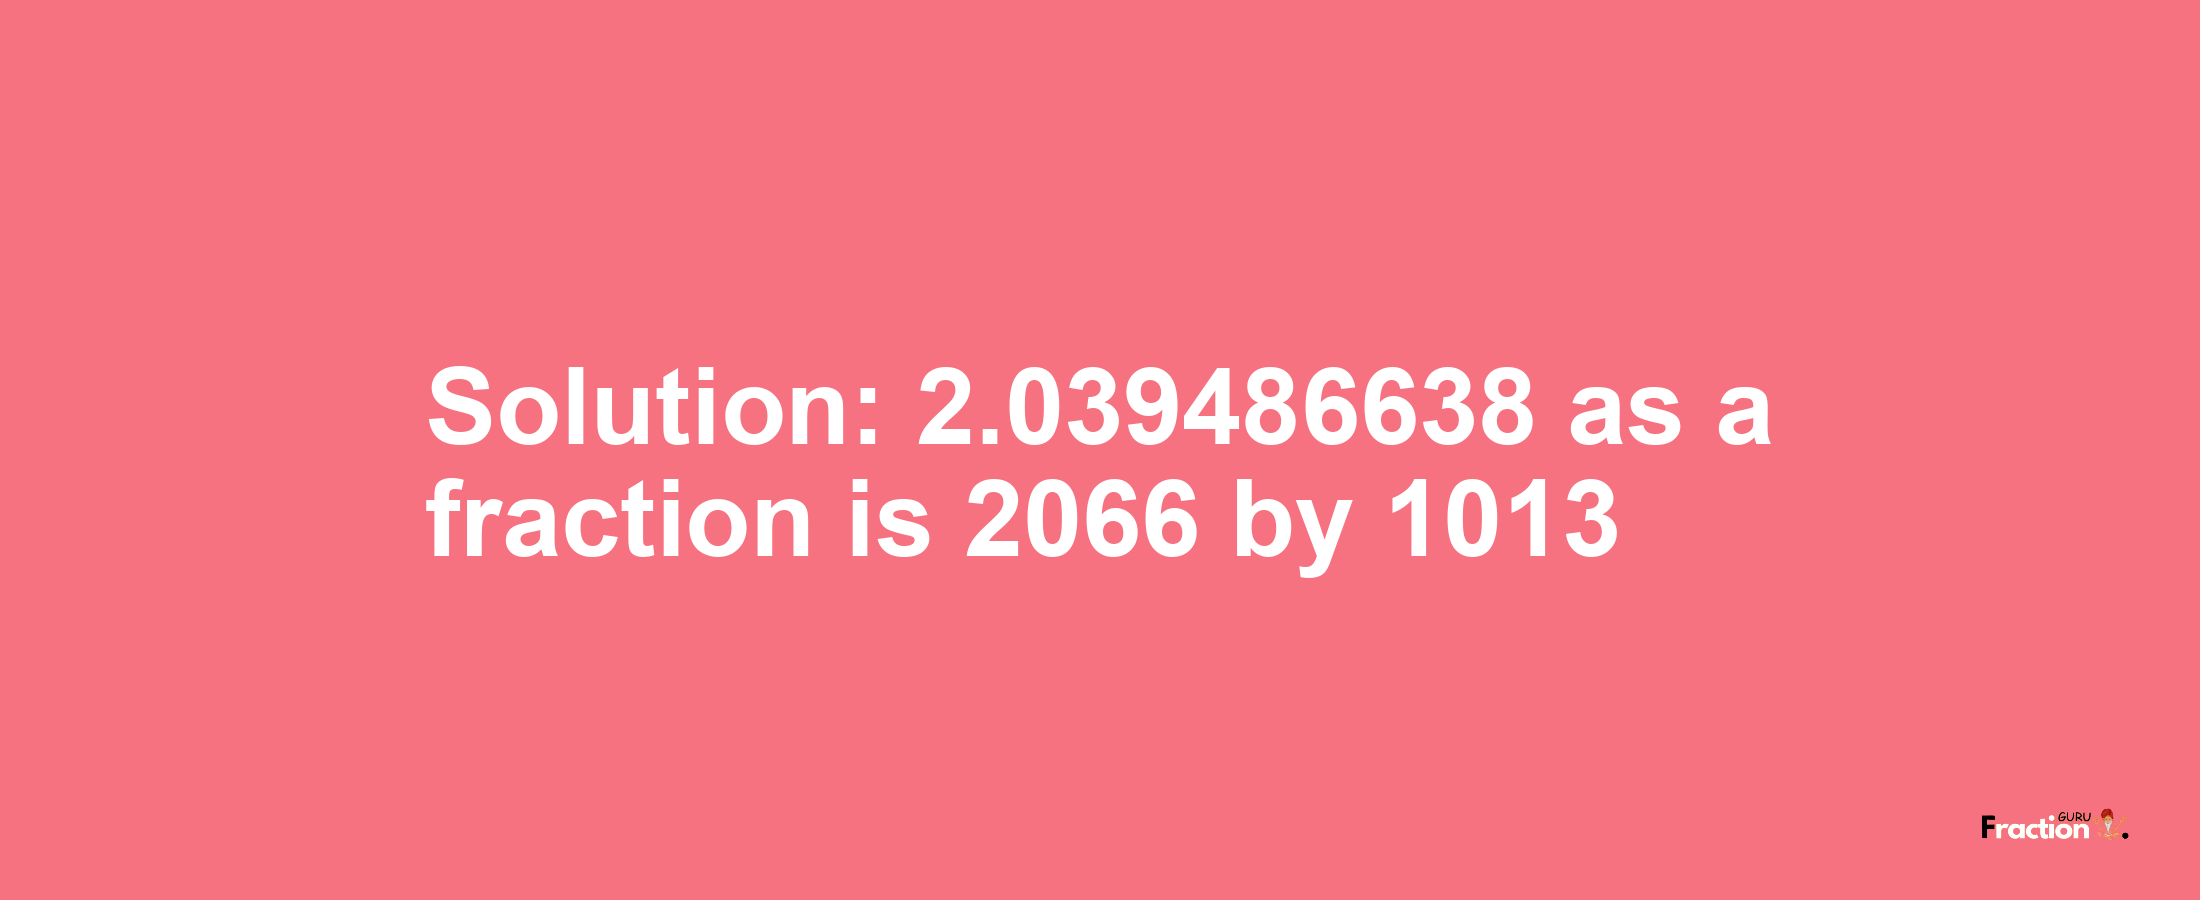 Solution:2.039486638 as a fraction is 2066/1013